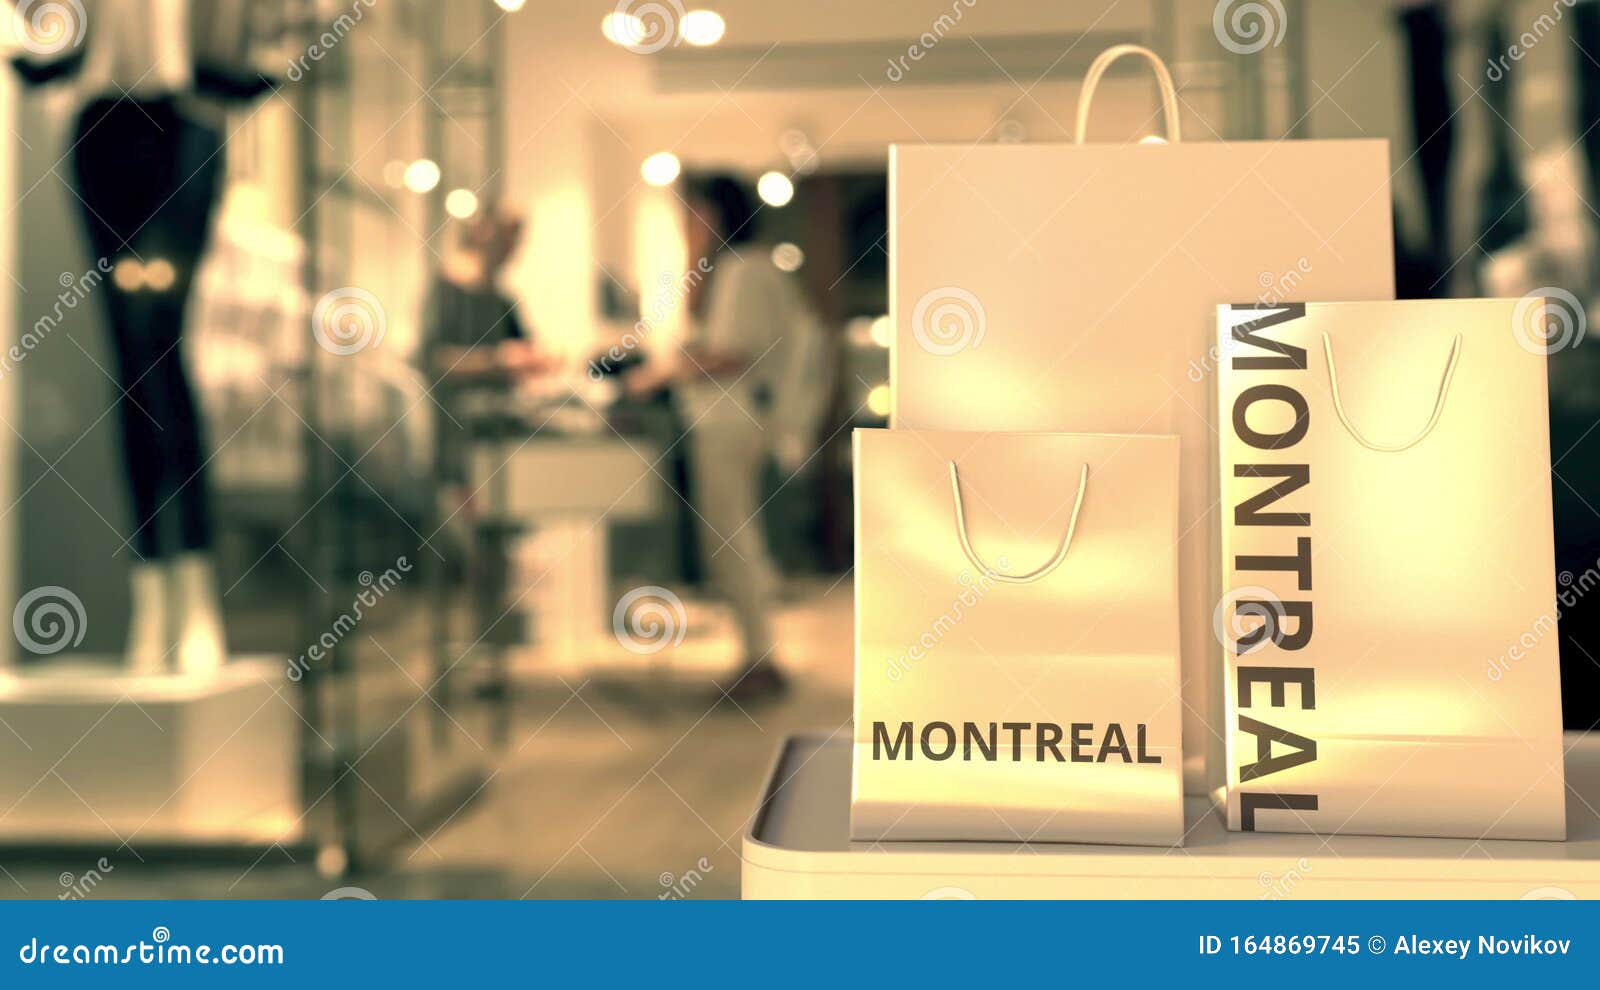 Paper Shopping Bags With Montreal Caption Against Blurred Store Entrance. Retail In Canada ...